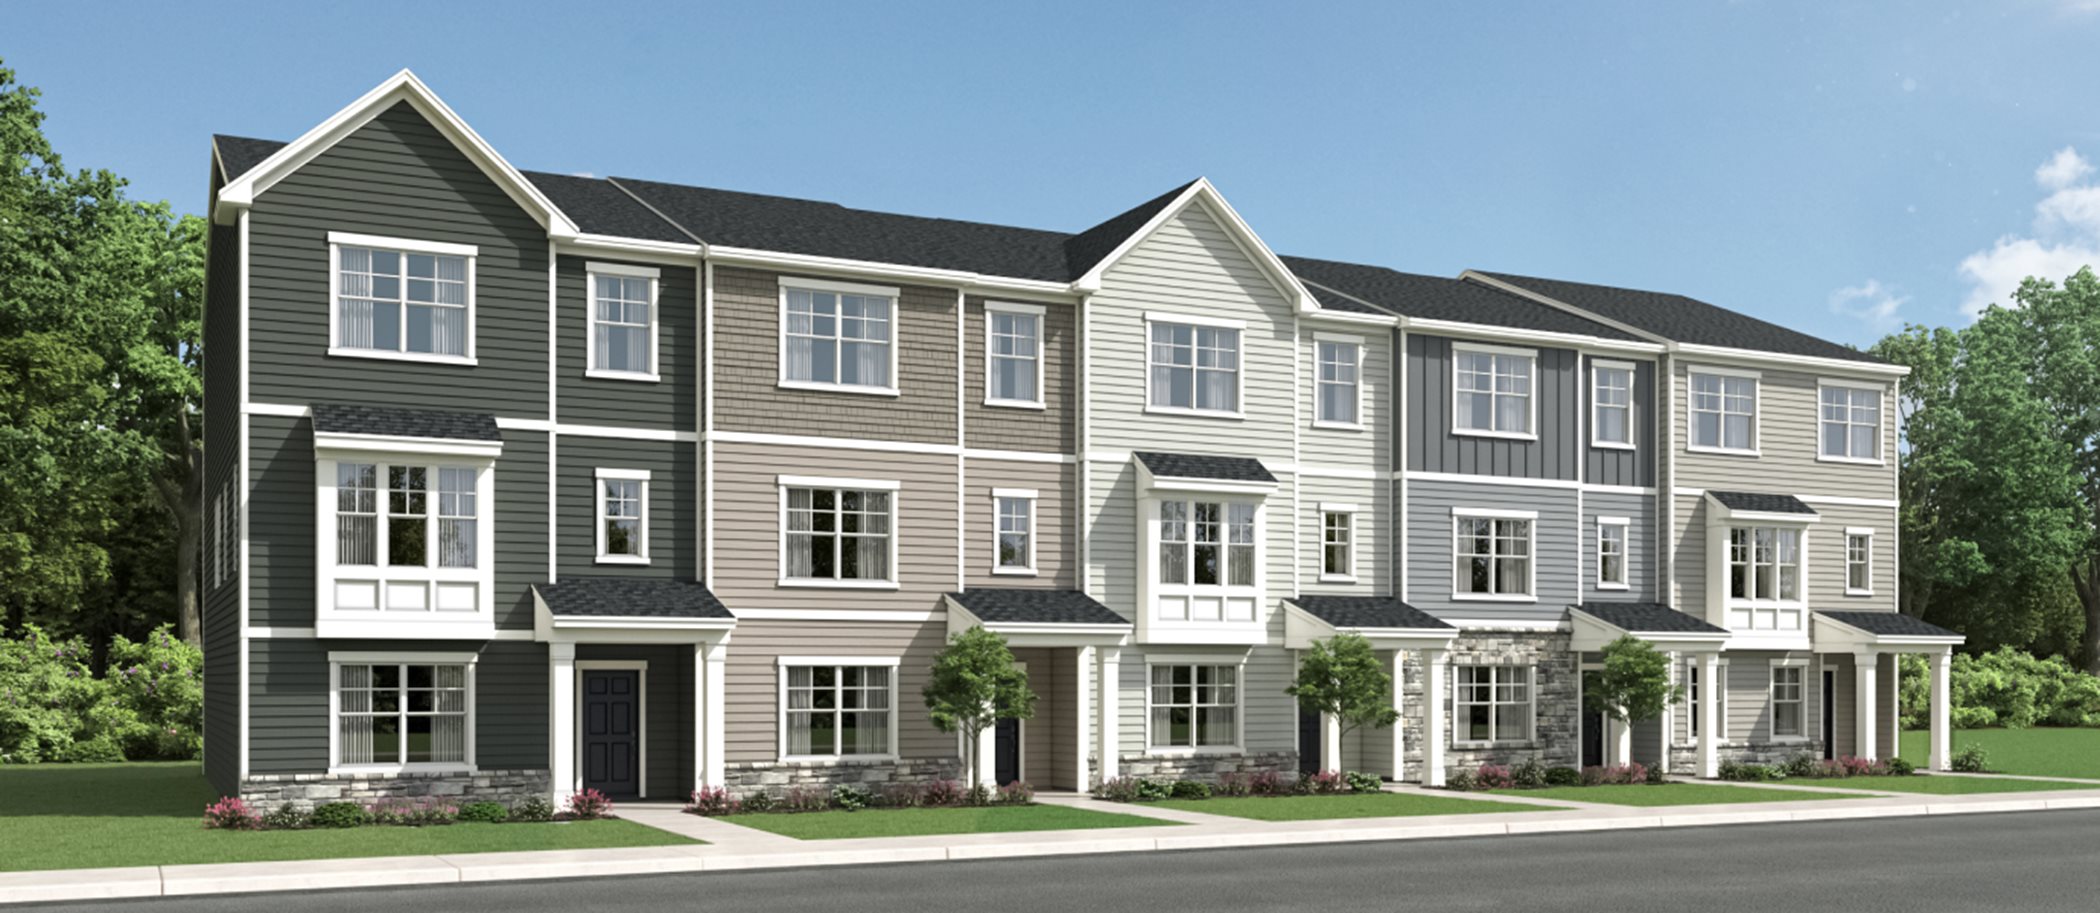 Streetscape at Frazier Collection at Brier Creek